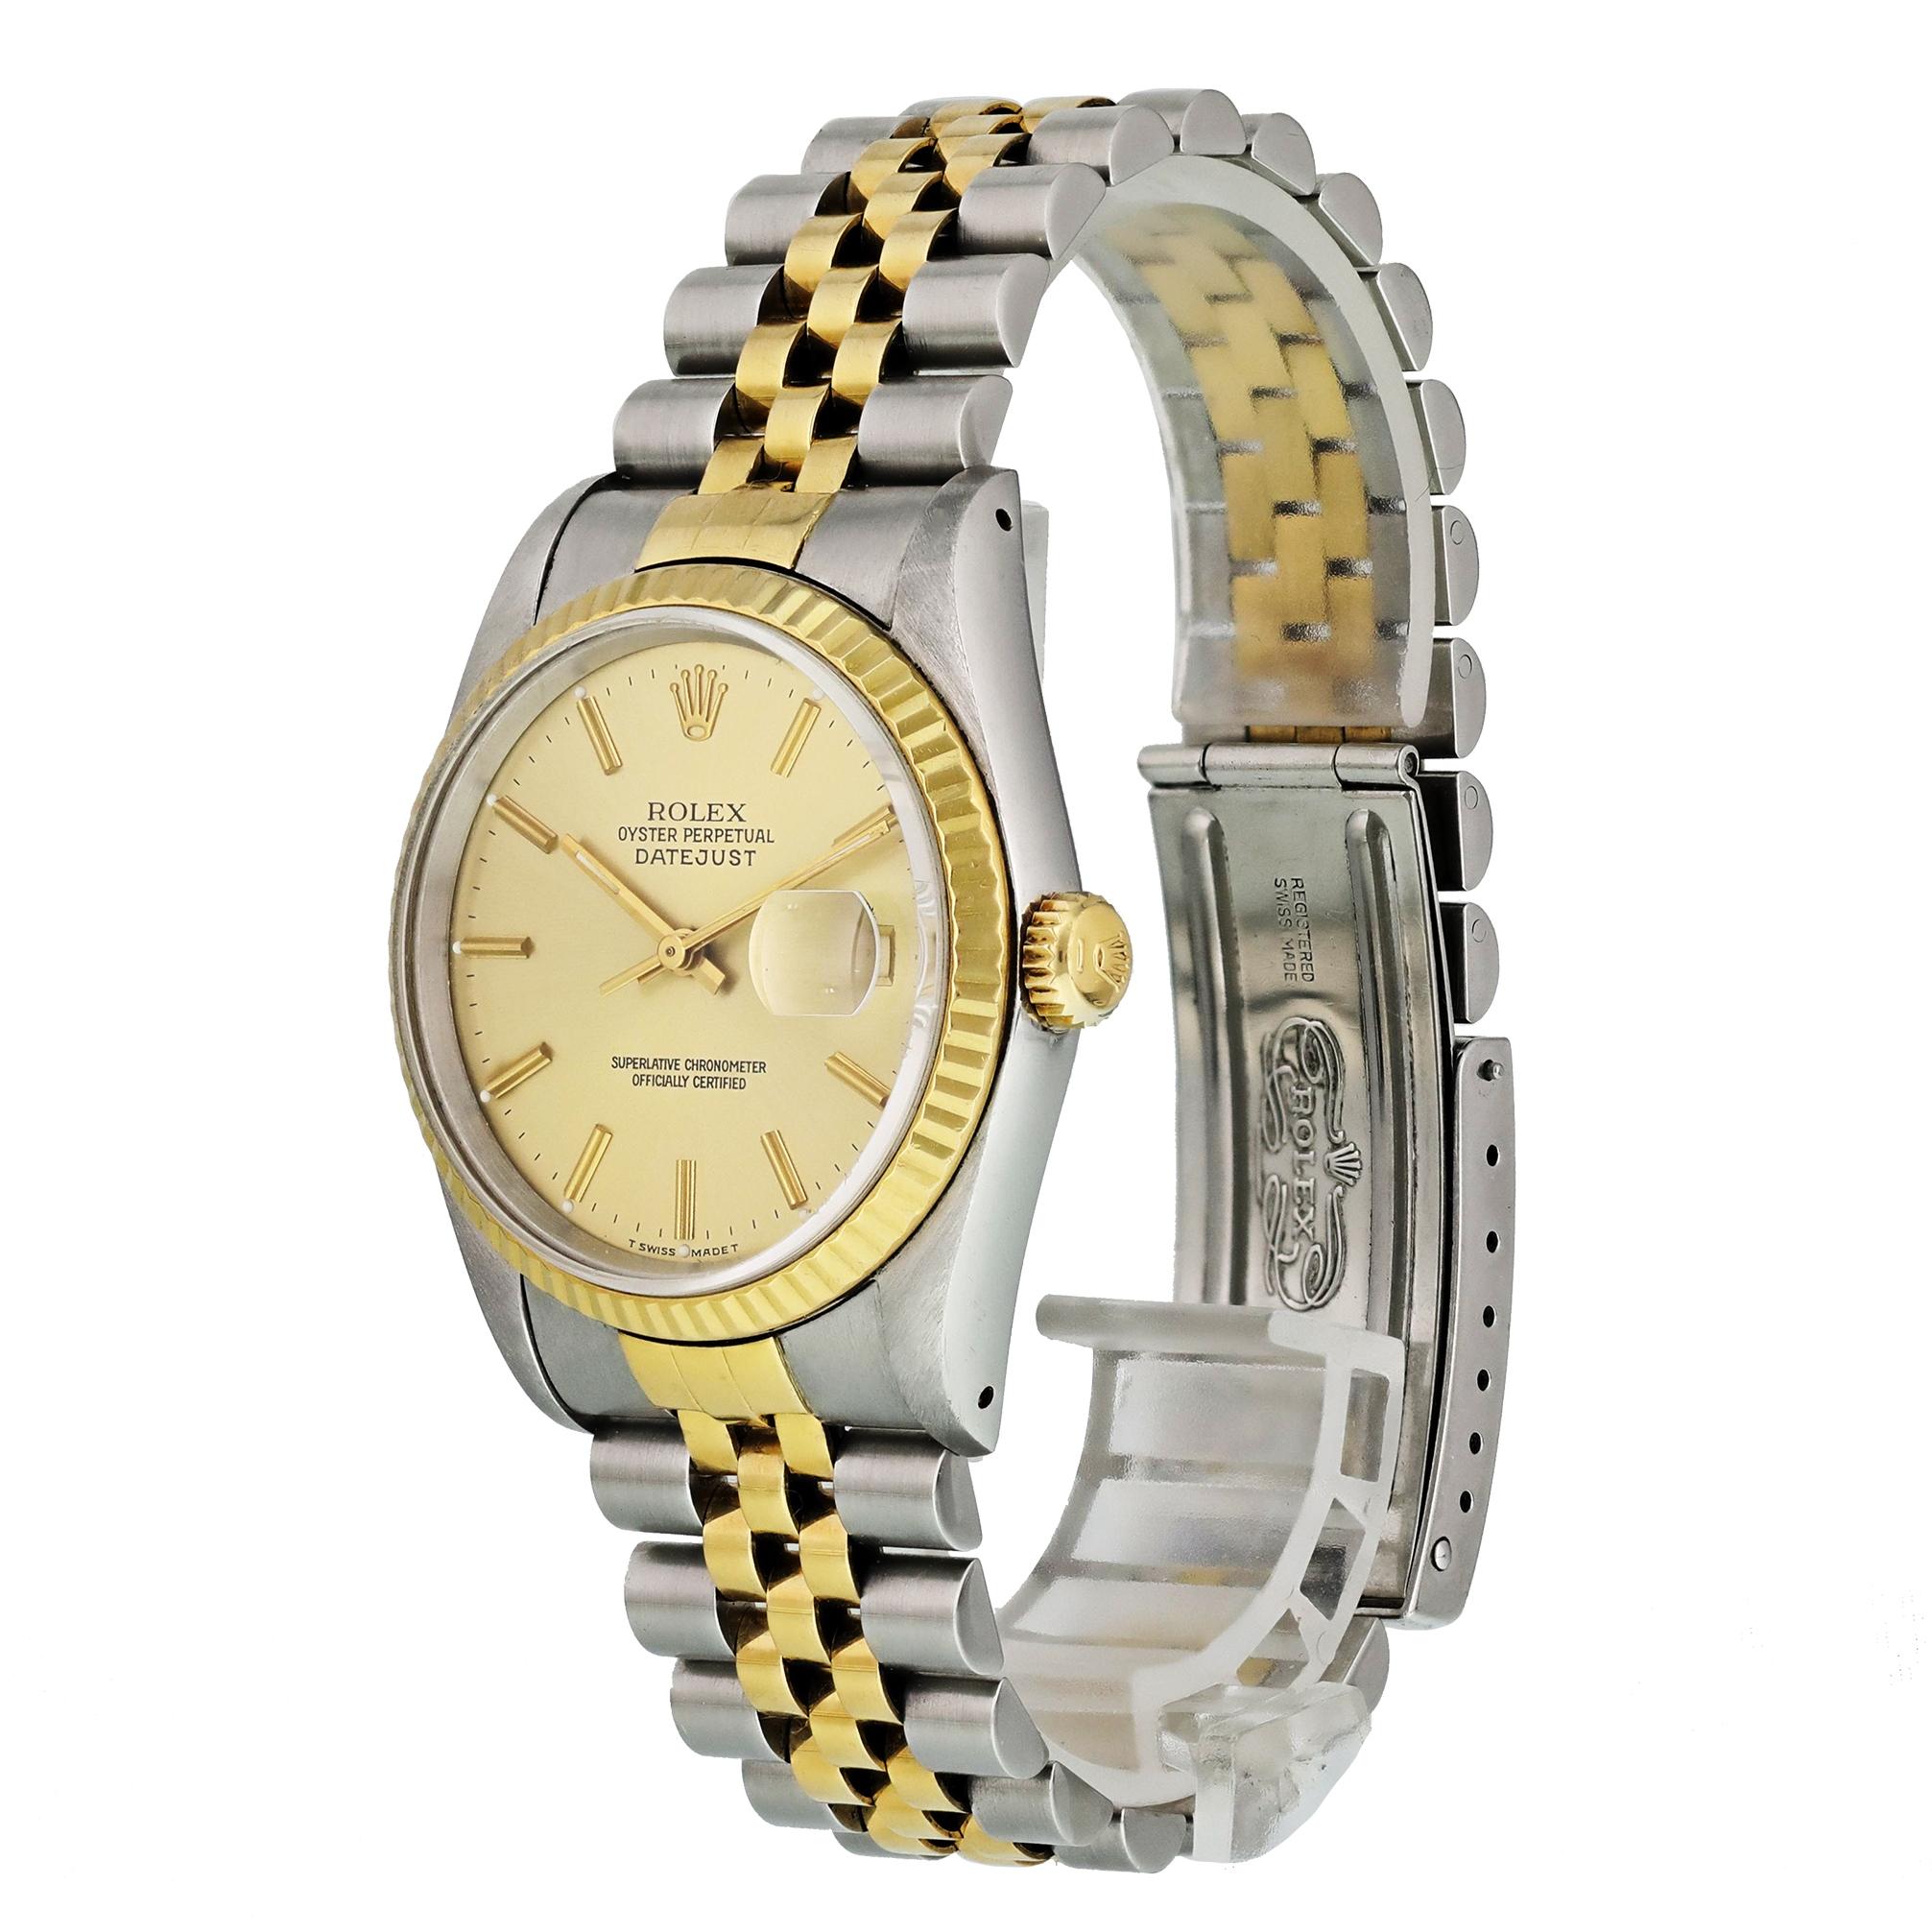 Rolex Datejust 16233 Men Watch. 
36mm Stainless Steel case. 
Yellow Gold Stationary bezel. 
Champagne dial with Luminous gold hands and index hour markers. 
Minute markers on the outer dial. 
Date display at the 3 o'clock position. 
Stainless Steel